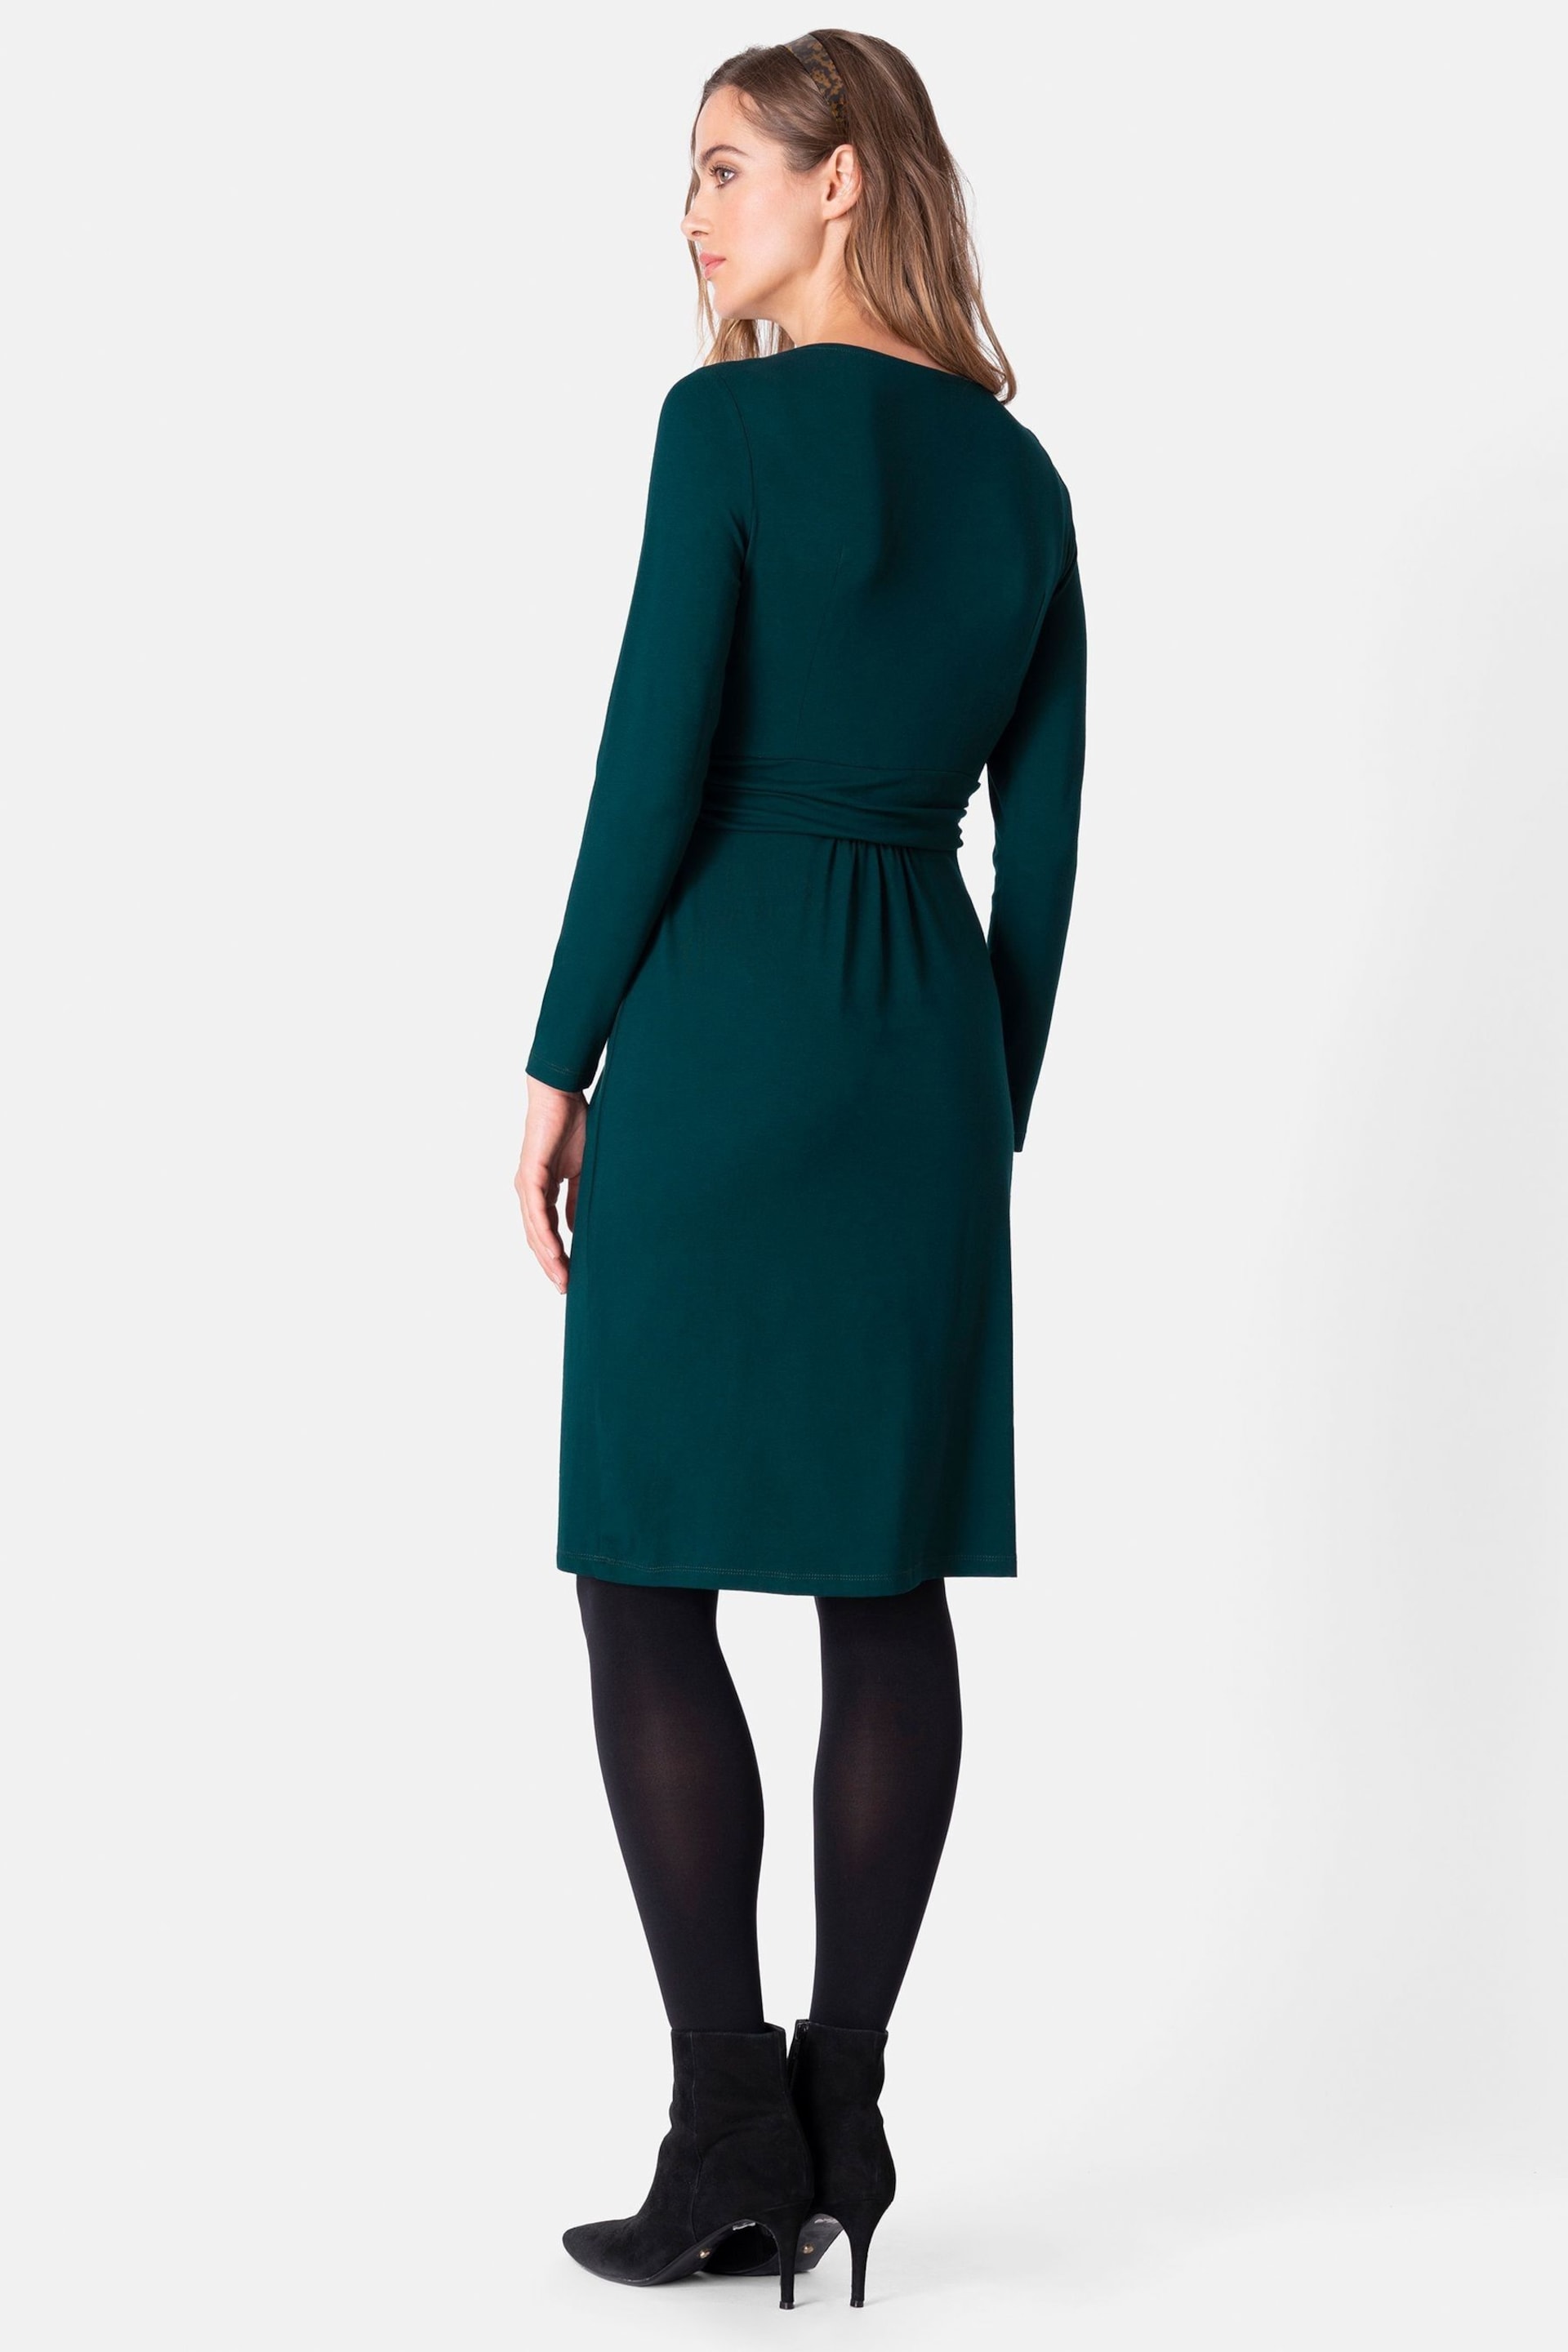 Seraphine Green Maternity And Nursing Pleat Detail Dress - Image 2 of 4